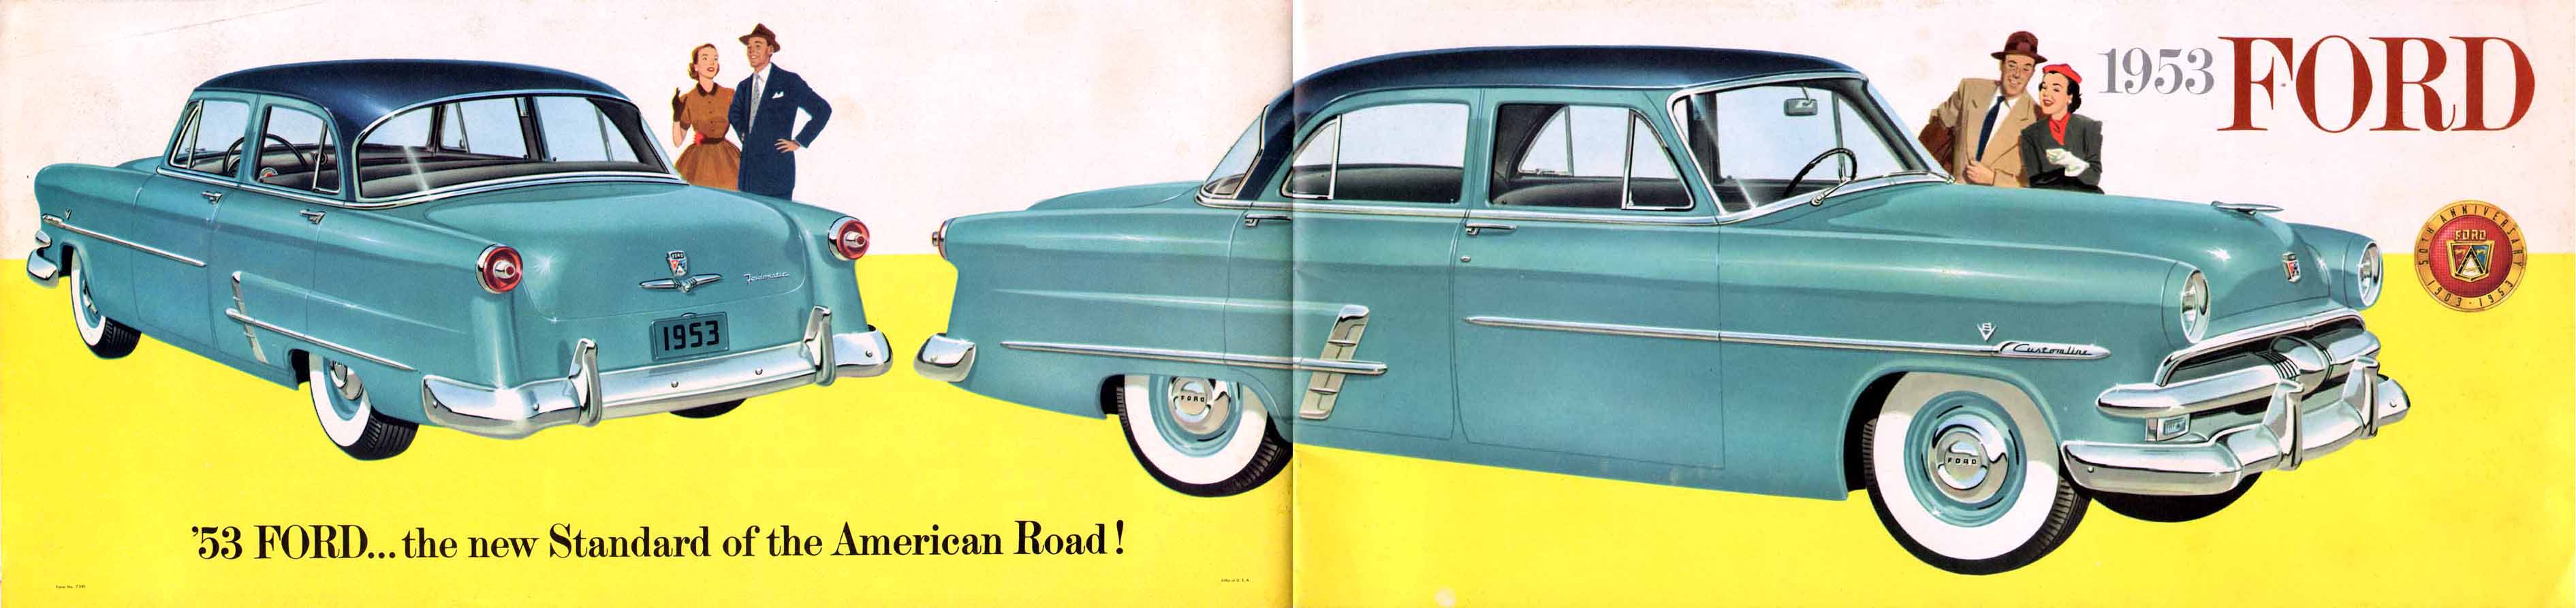 1953 Ford Brochure Page 7